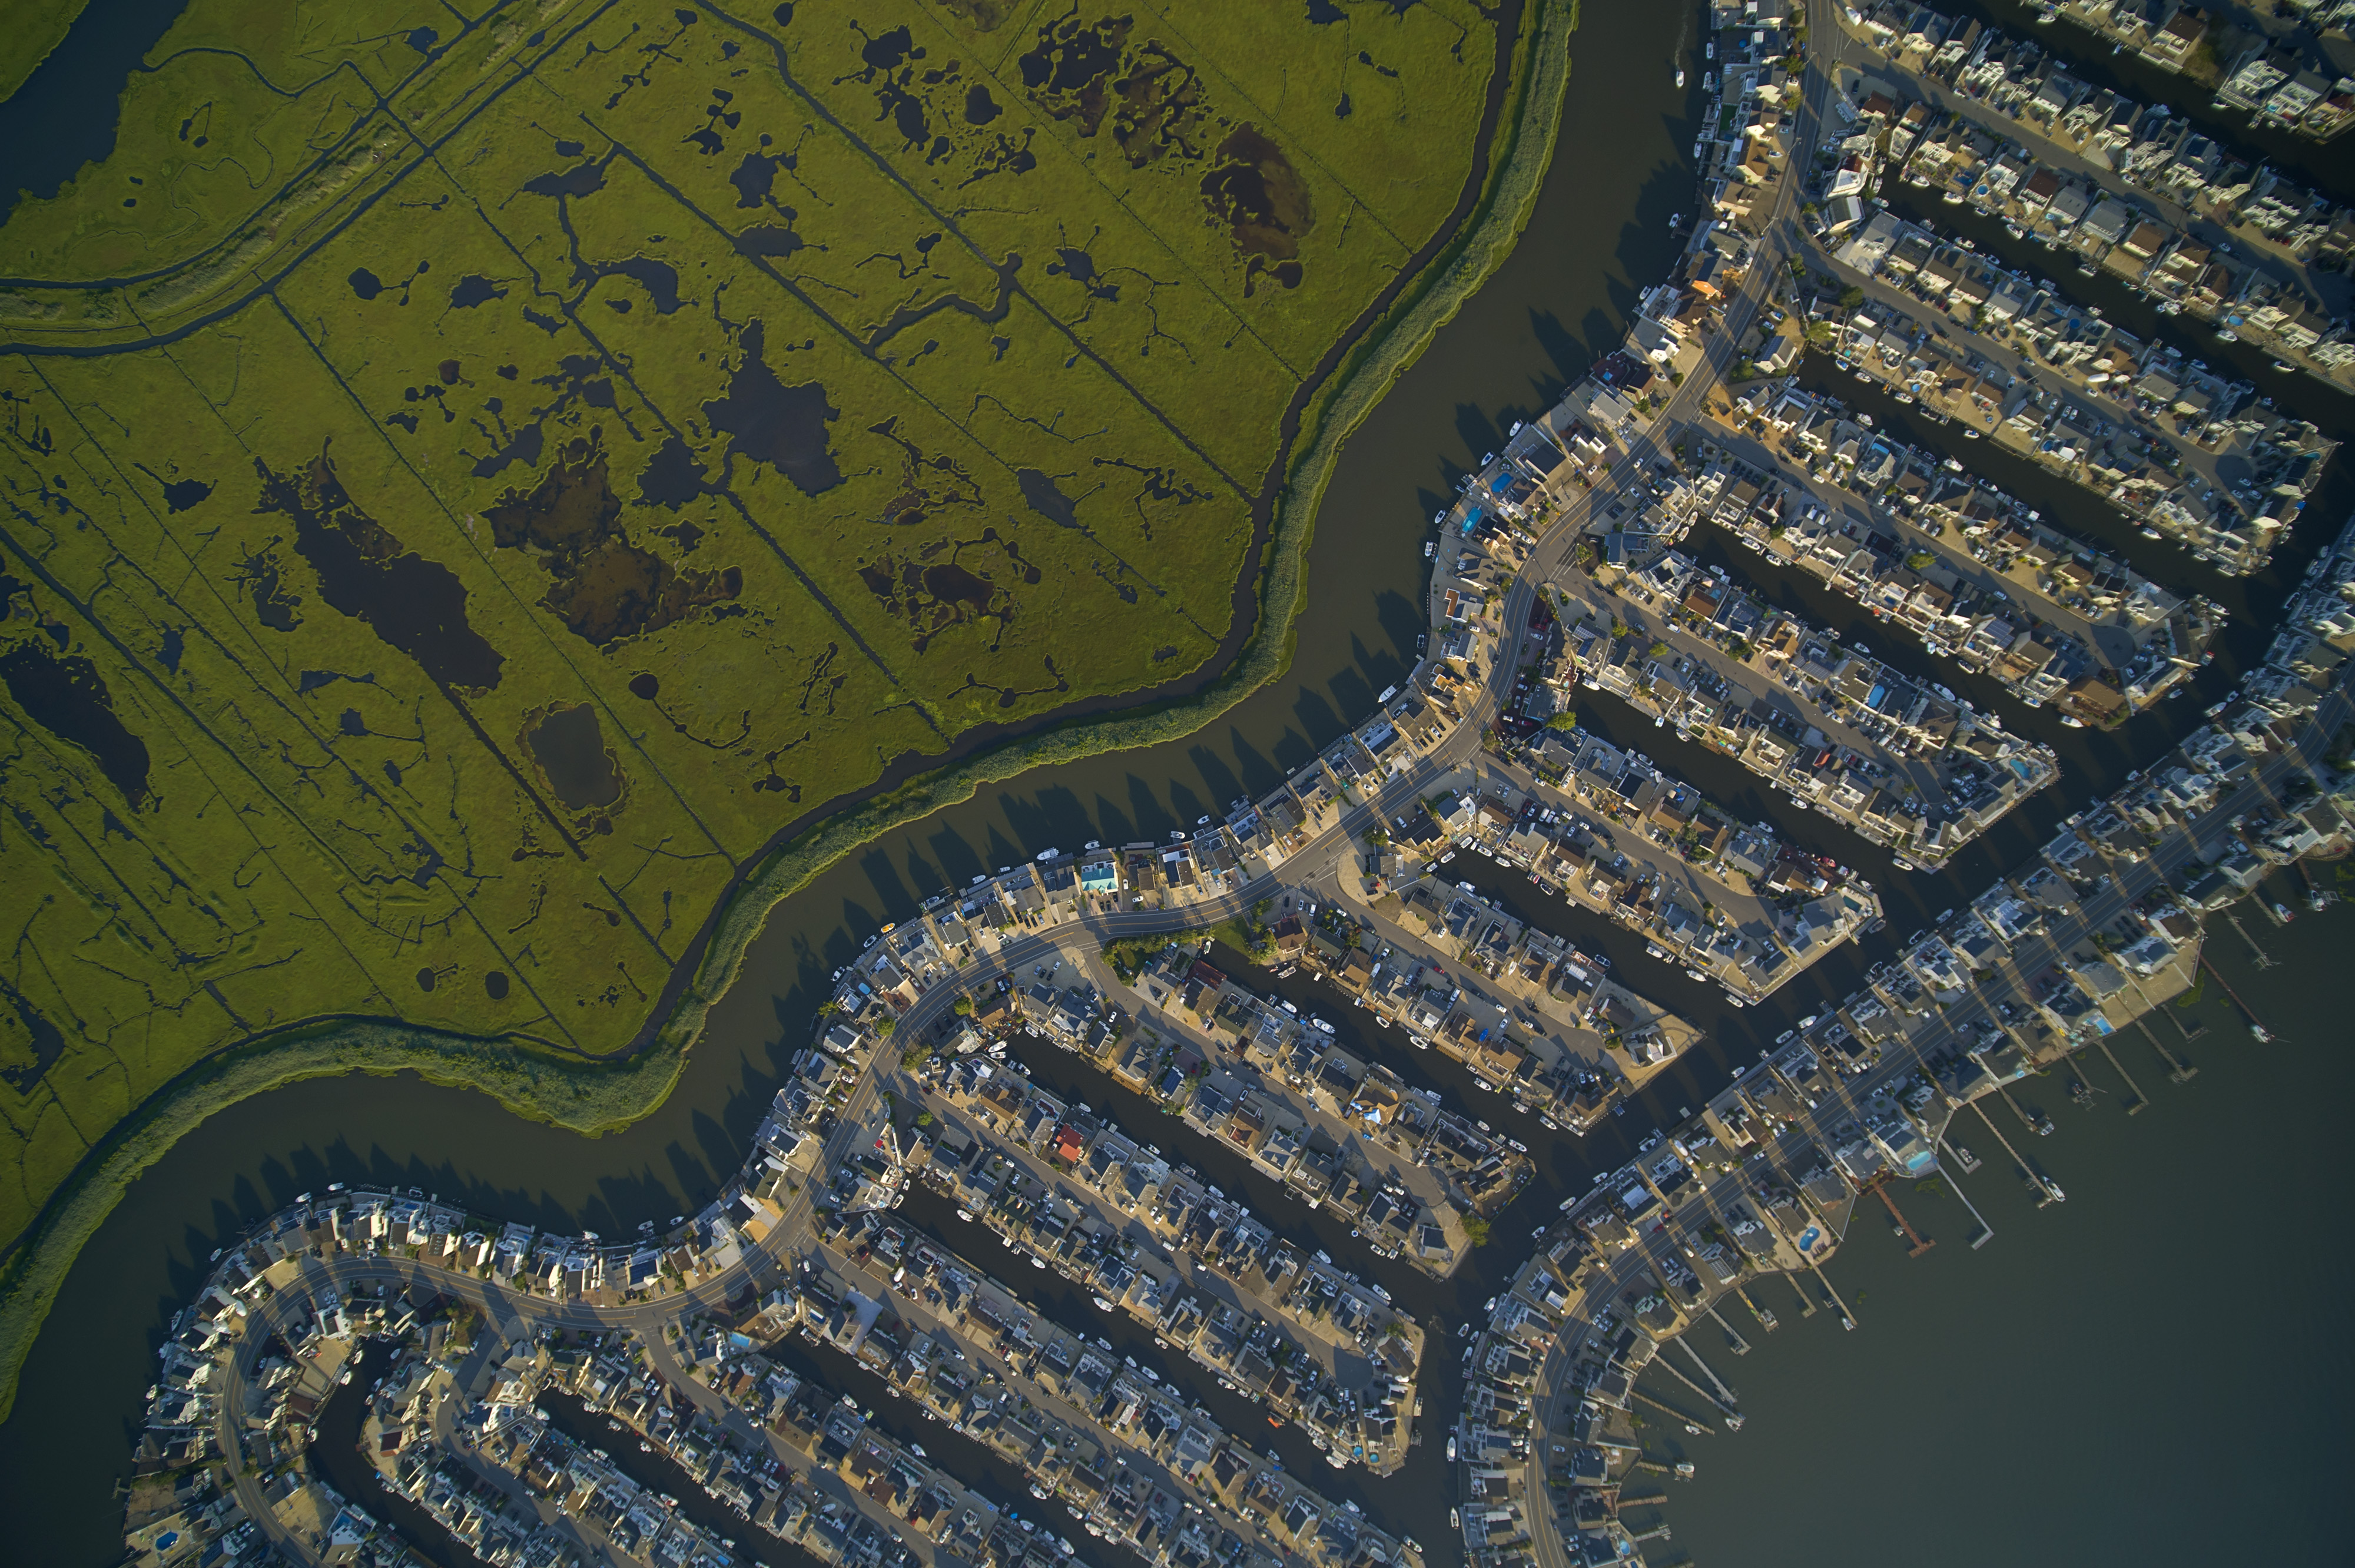 Aerial view of a coastal town surrounded by water.